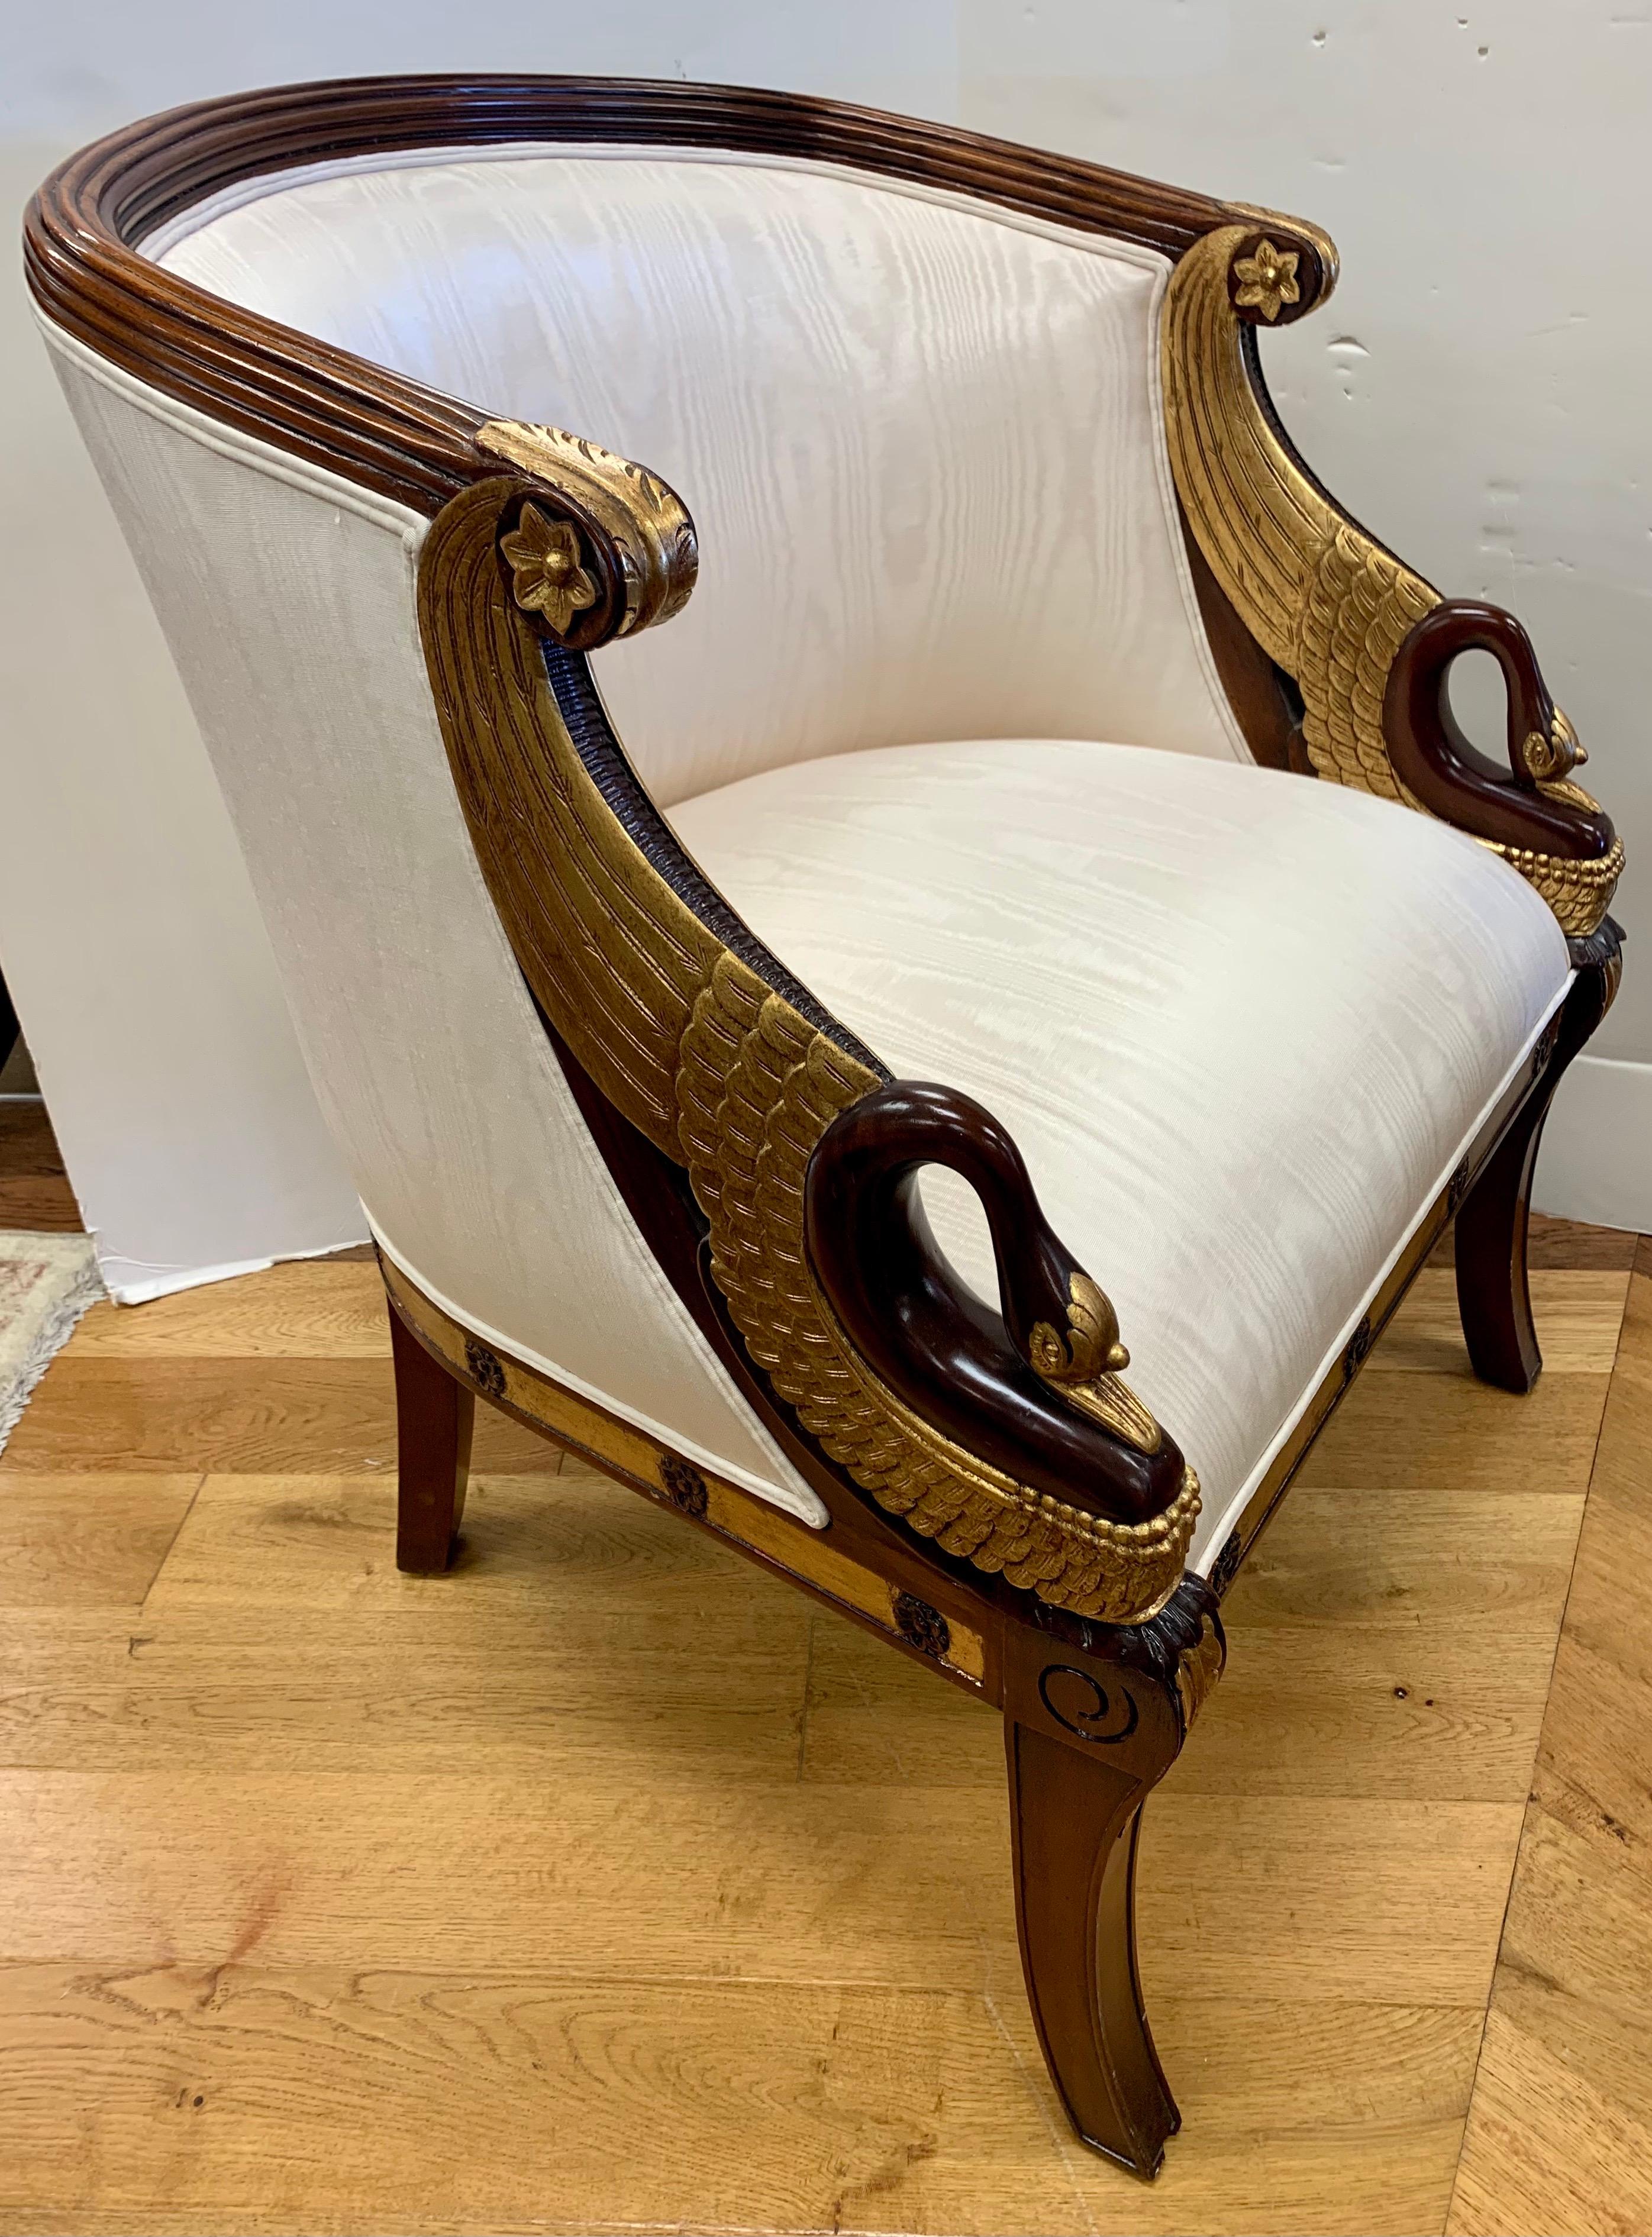 Elegant French empire style carved mahogany barrel back chair with exquisite gold details and the most magnificent gold swans on both of the arms! Upholstered in a cream silk fabric.